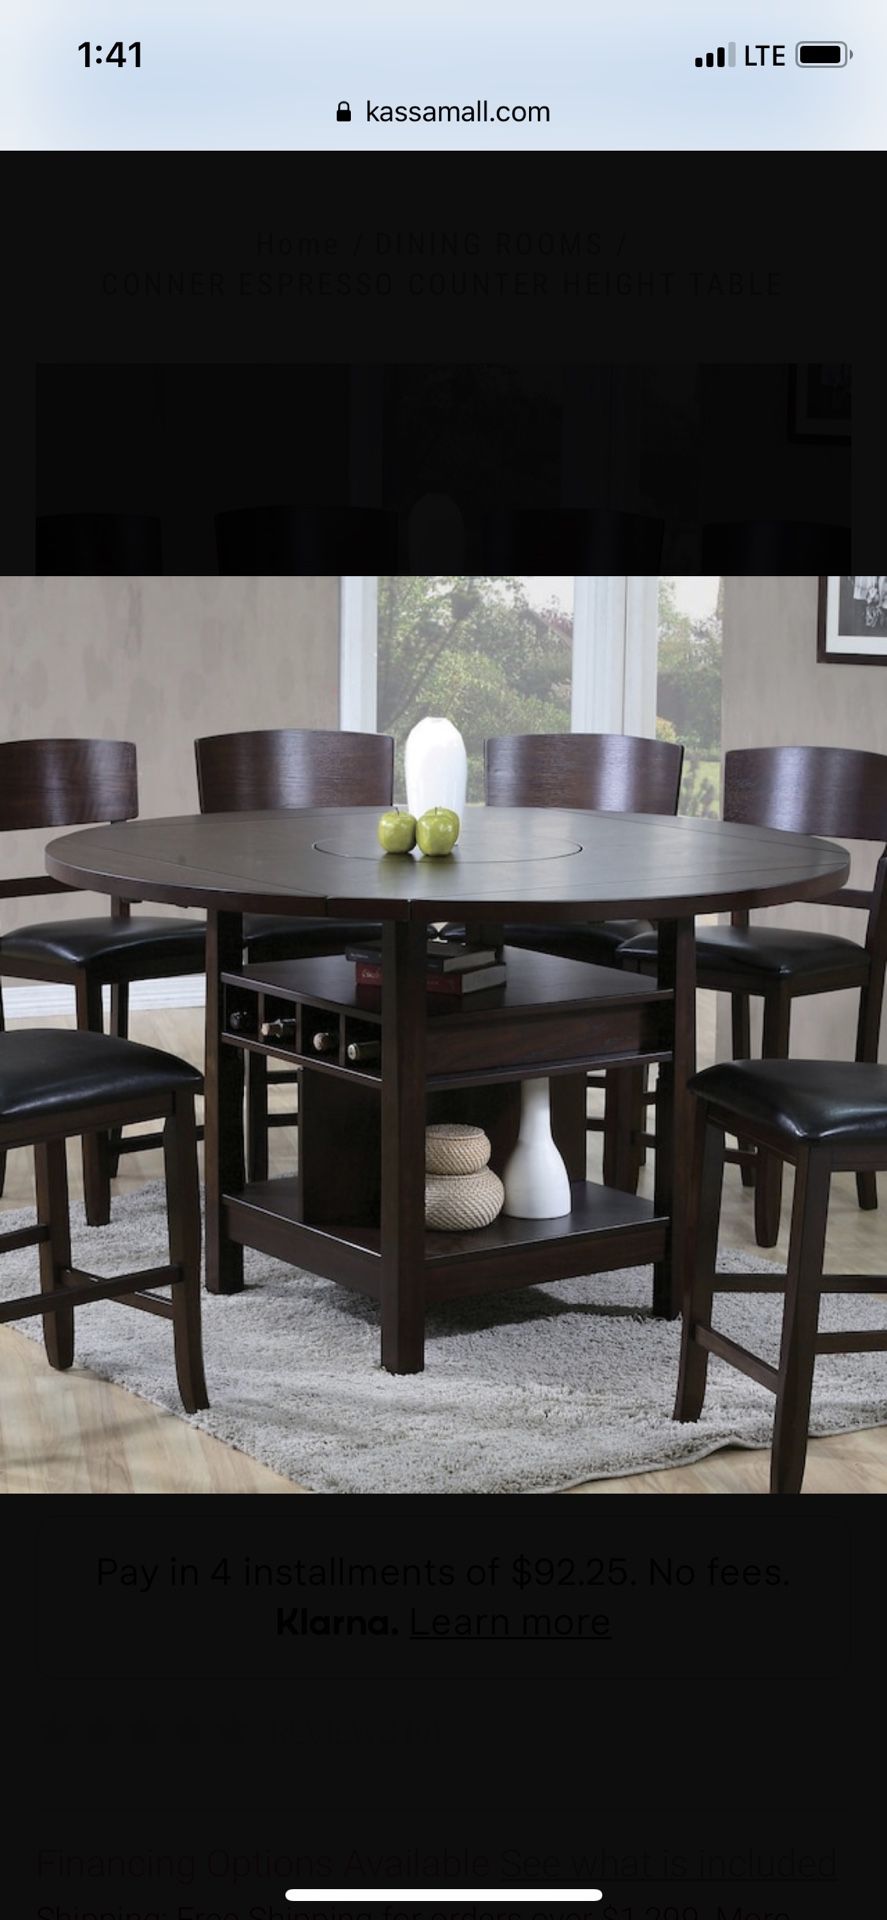 Conner Espresso Counter Height Table w/ Lazy Susan, 4 chairs